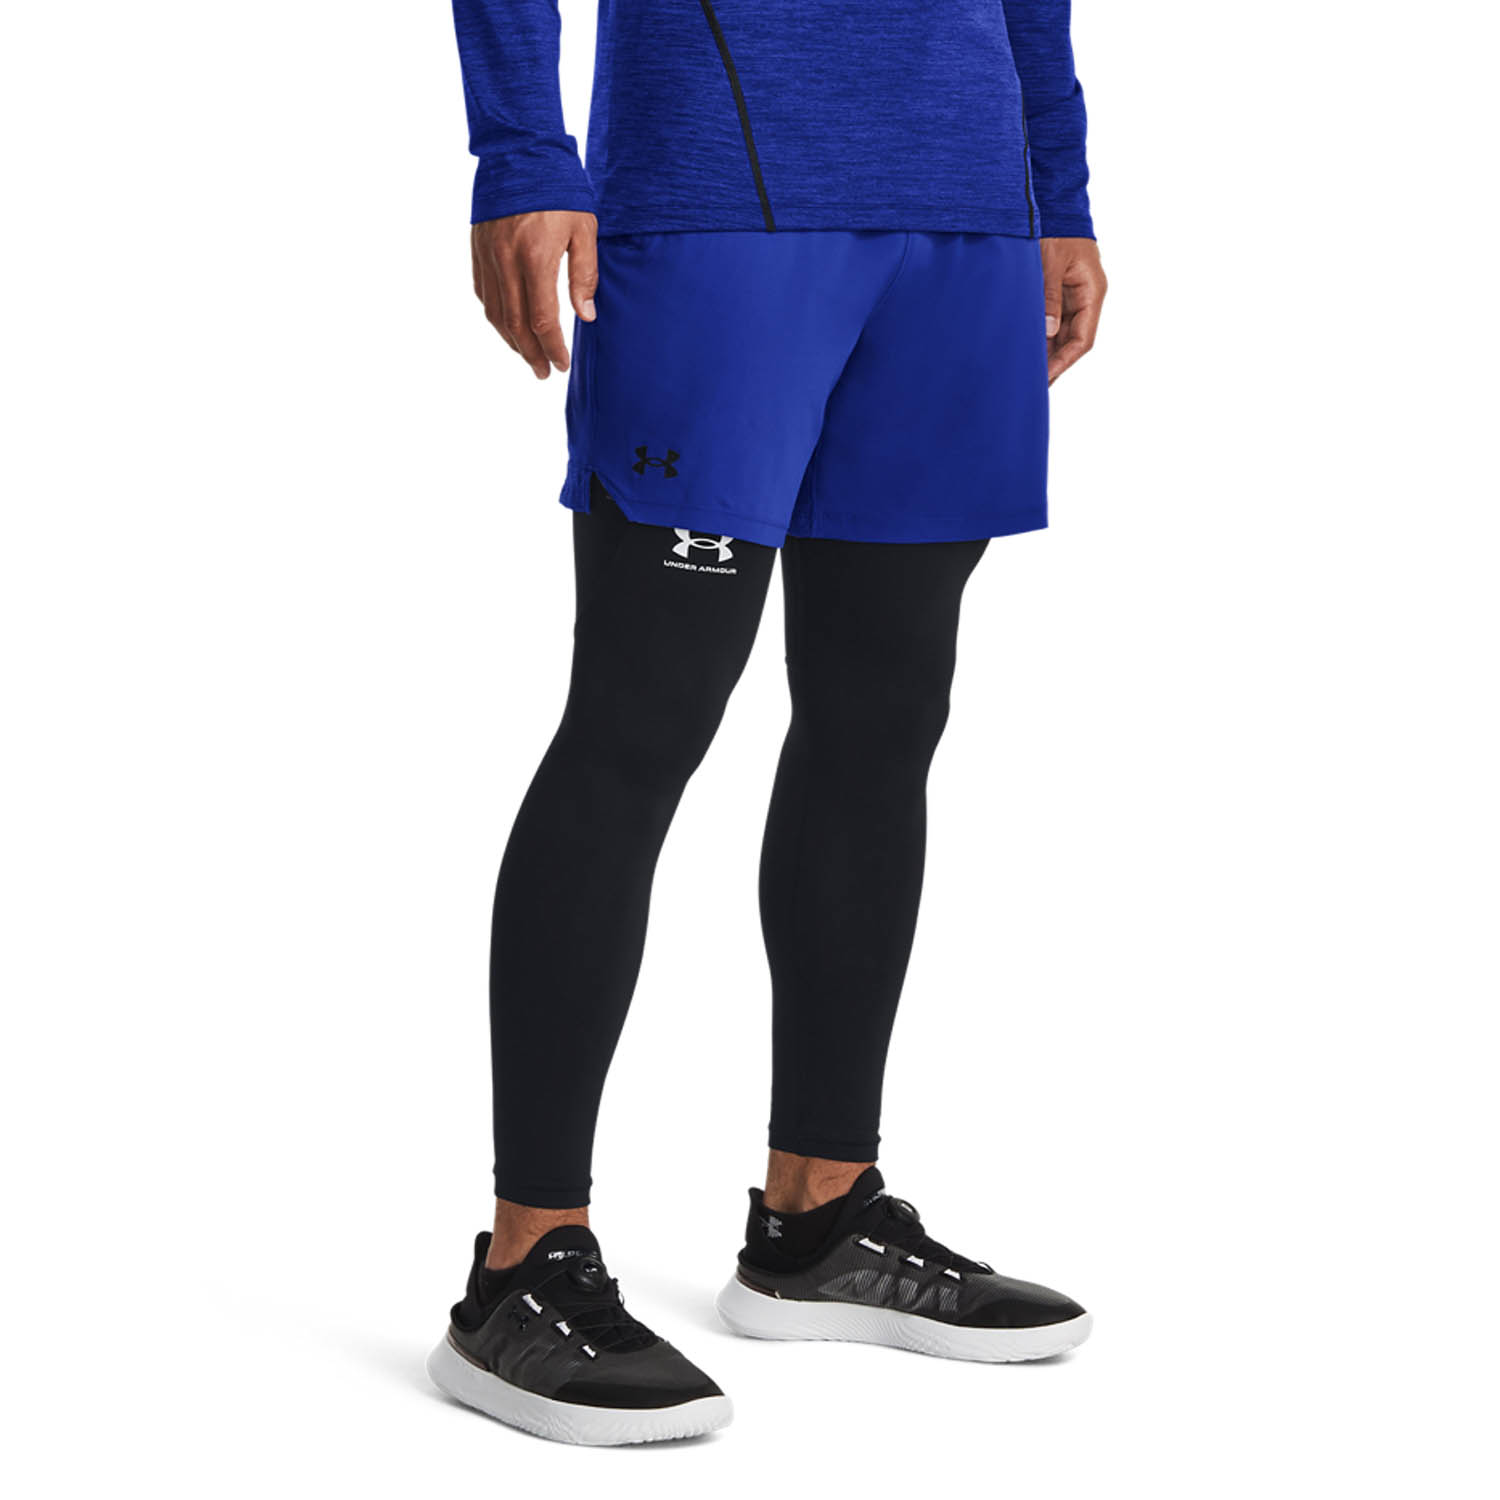 Under Armour Vanish Woven Graphic 6in Shorts - Team Royal/Black